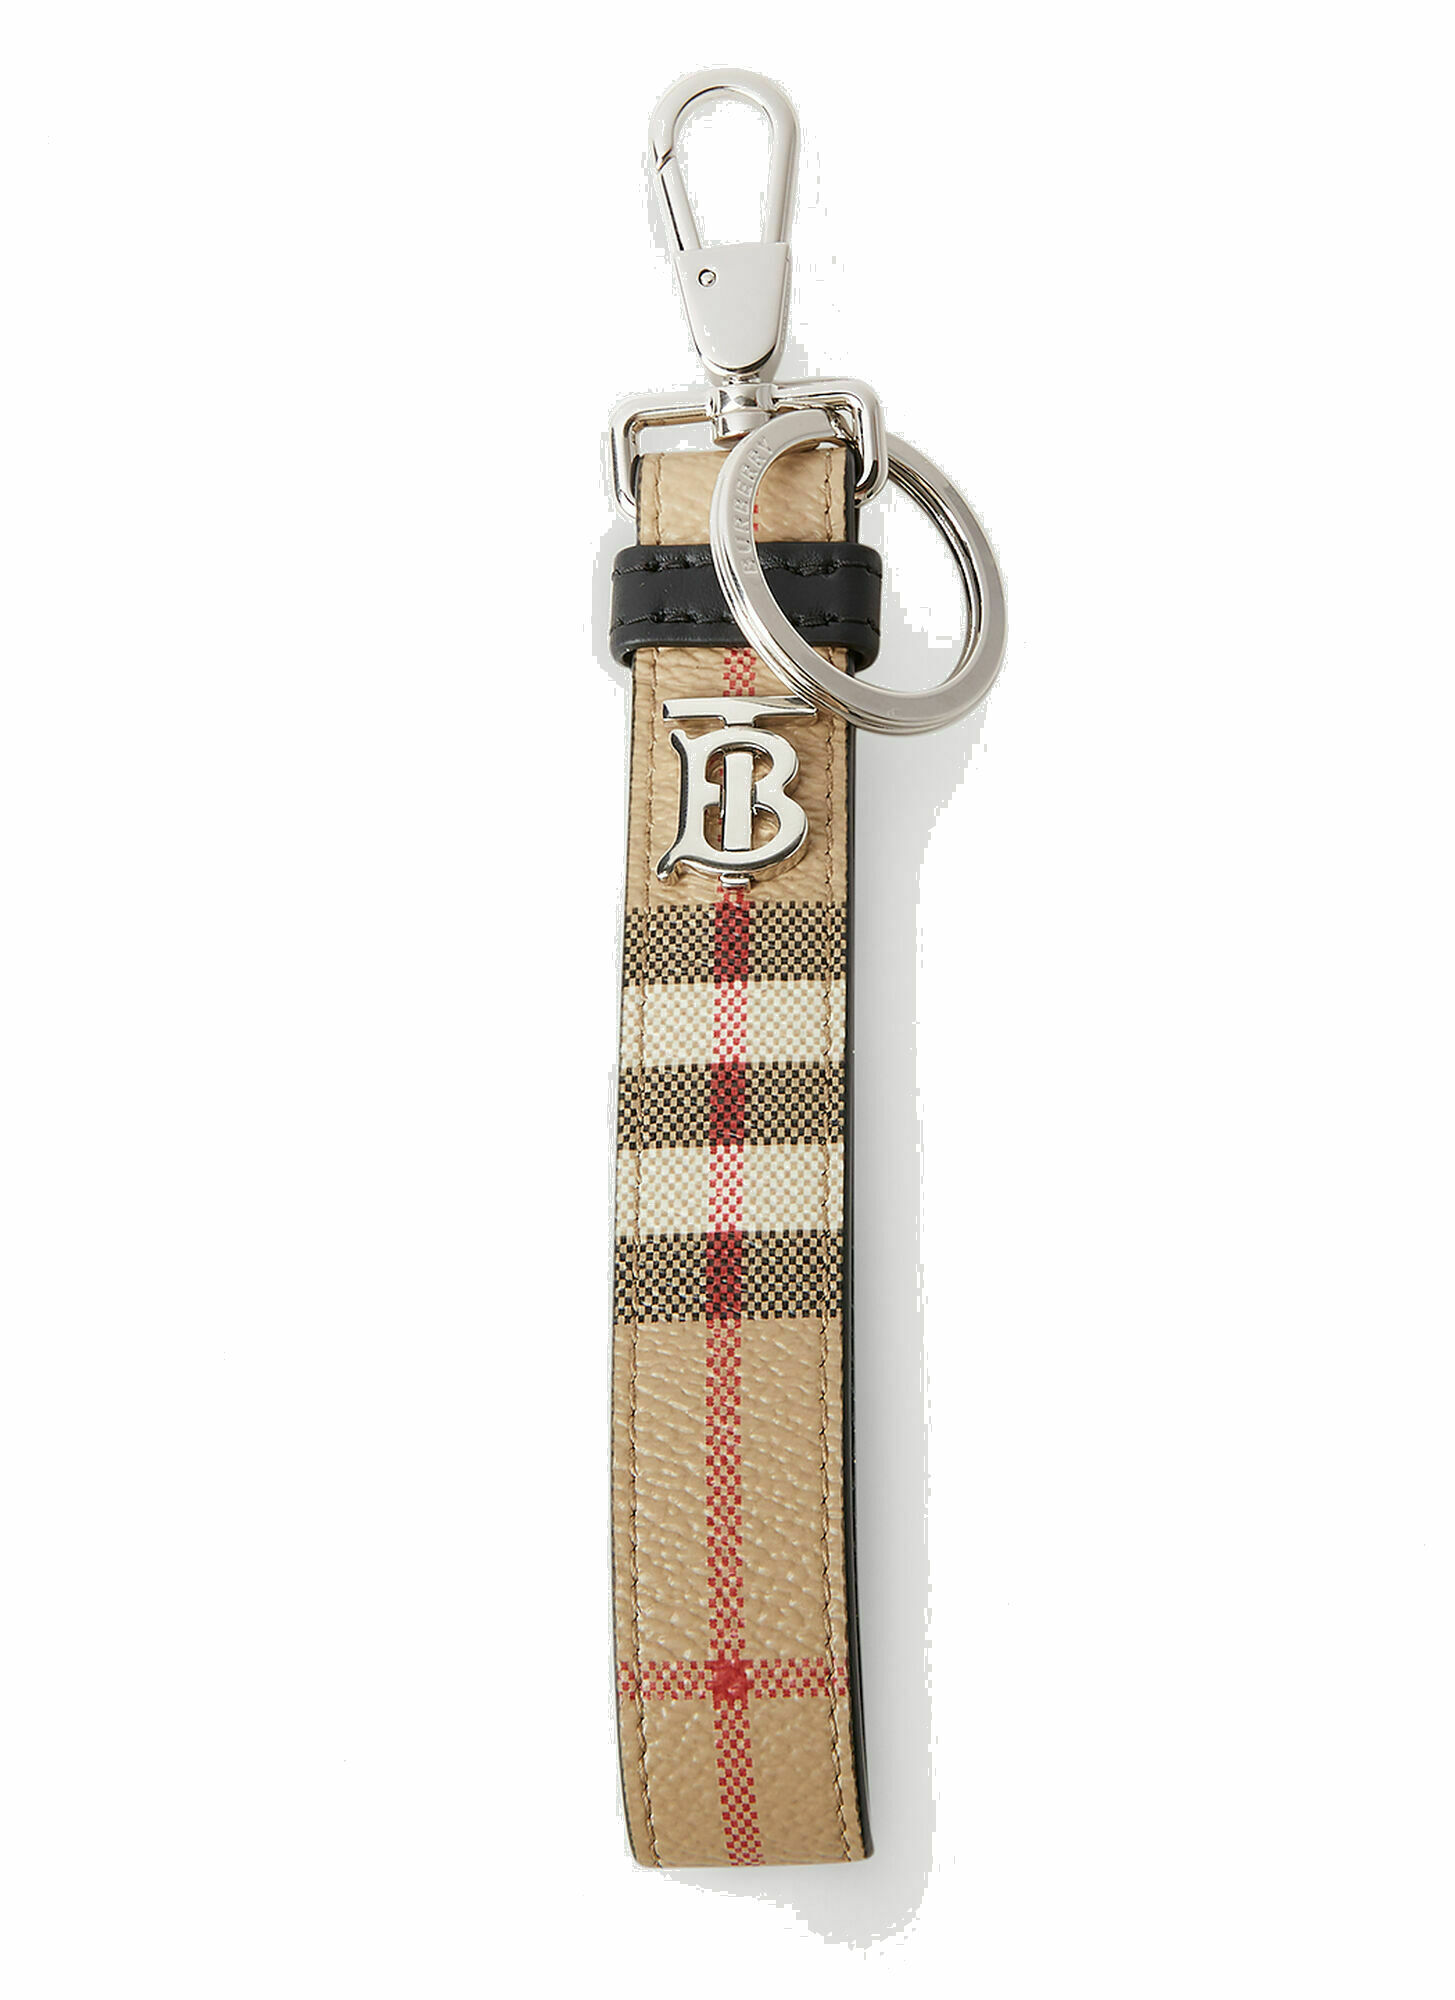 Burberry - TB Check Keyring in Beige Burberry